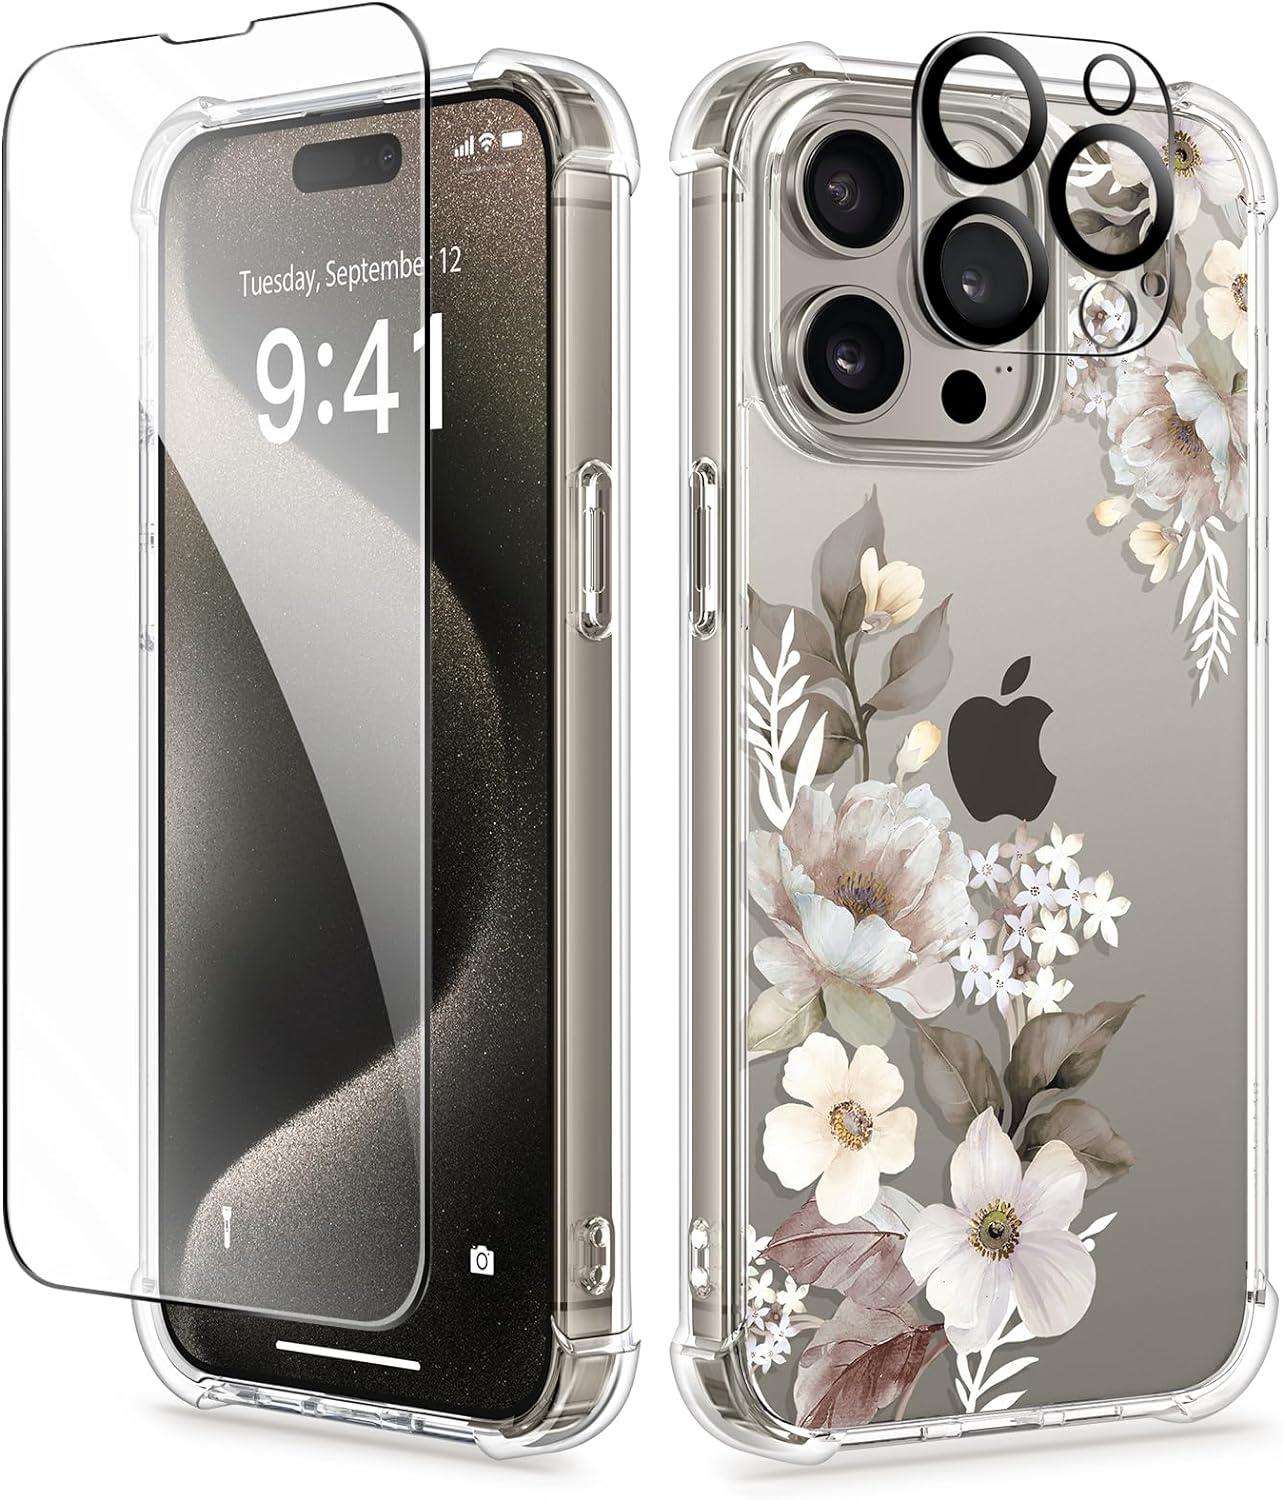 This case was perfect in every way. The design with the black butterflies was what I was looking for. The protection makes me feel confident that my phone will be protected. The extra bonus is the 2 screen protectors (I havent used yet) & the 2 camera lens covers great product, great quality and great price!